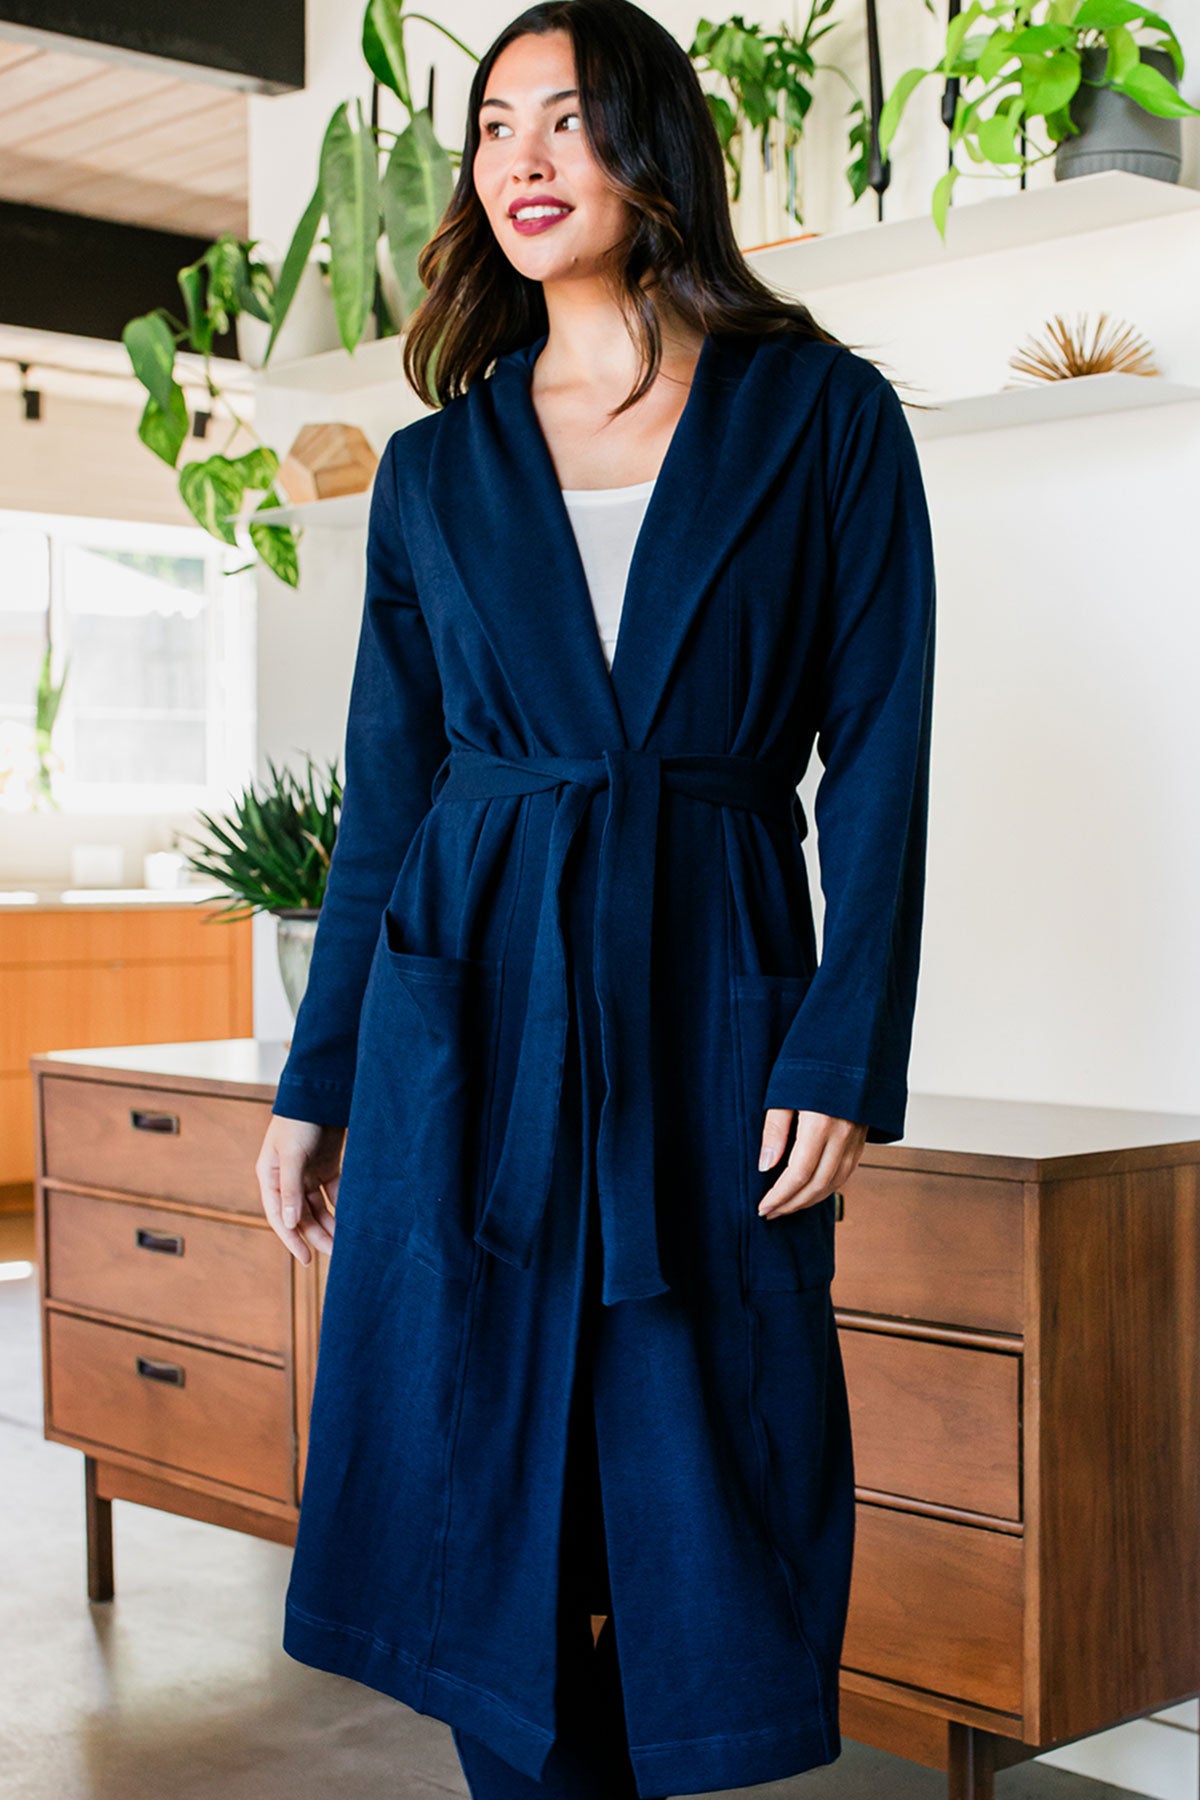 A woman standing with both hands at her sides, smiling and looking off to the side, wearing Yala Elliot Bamboo & Organic Cotton Sweatshirt Hooded Robe in Navy